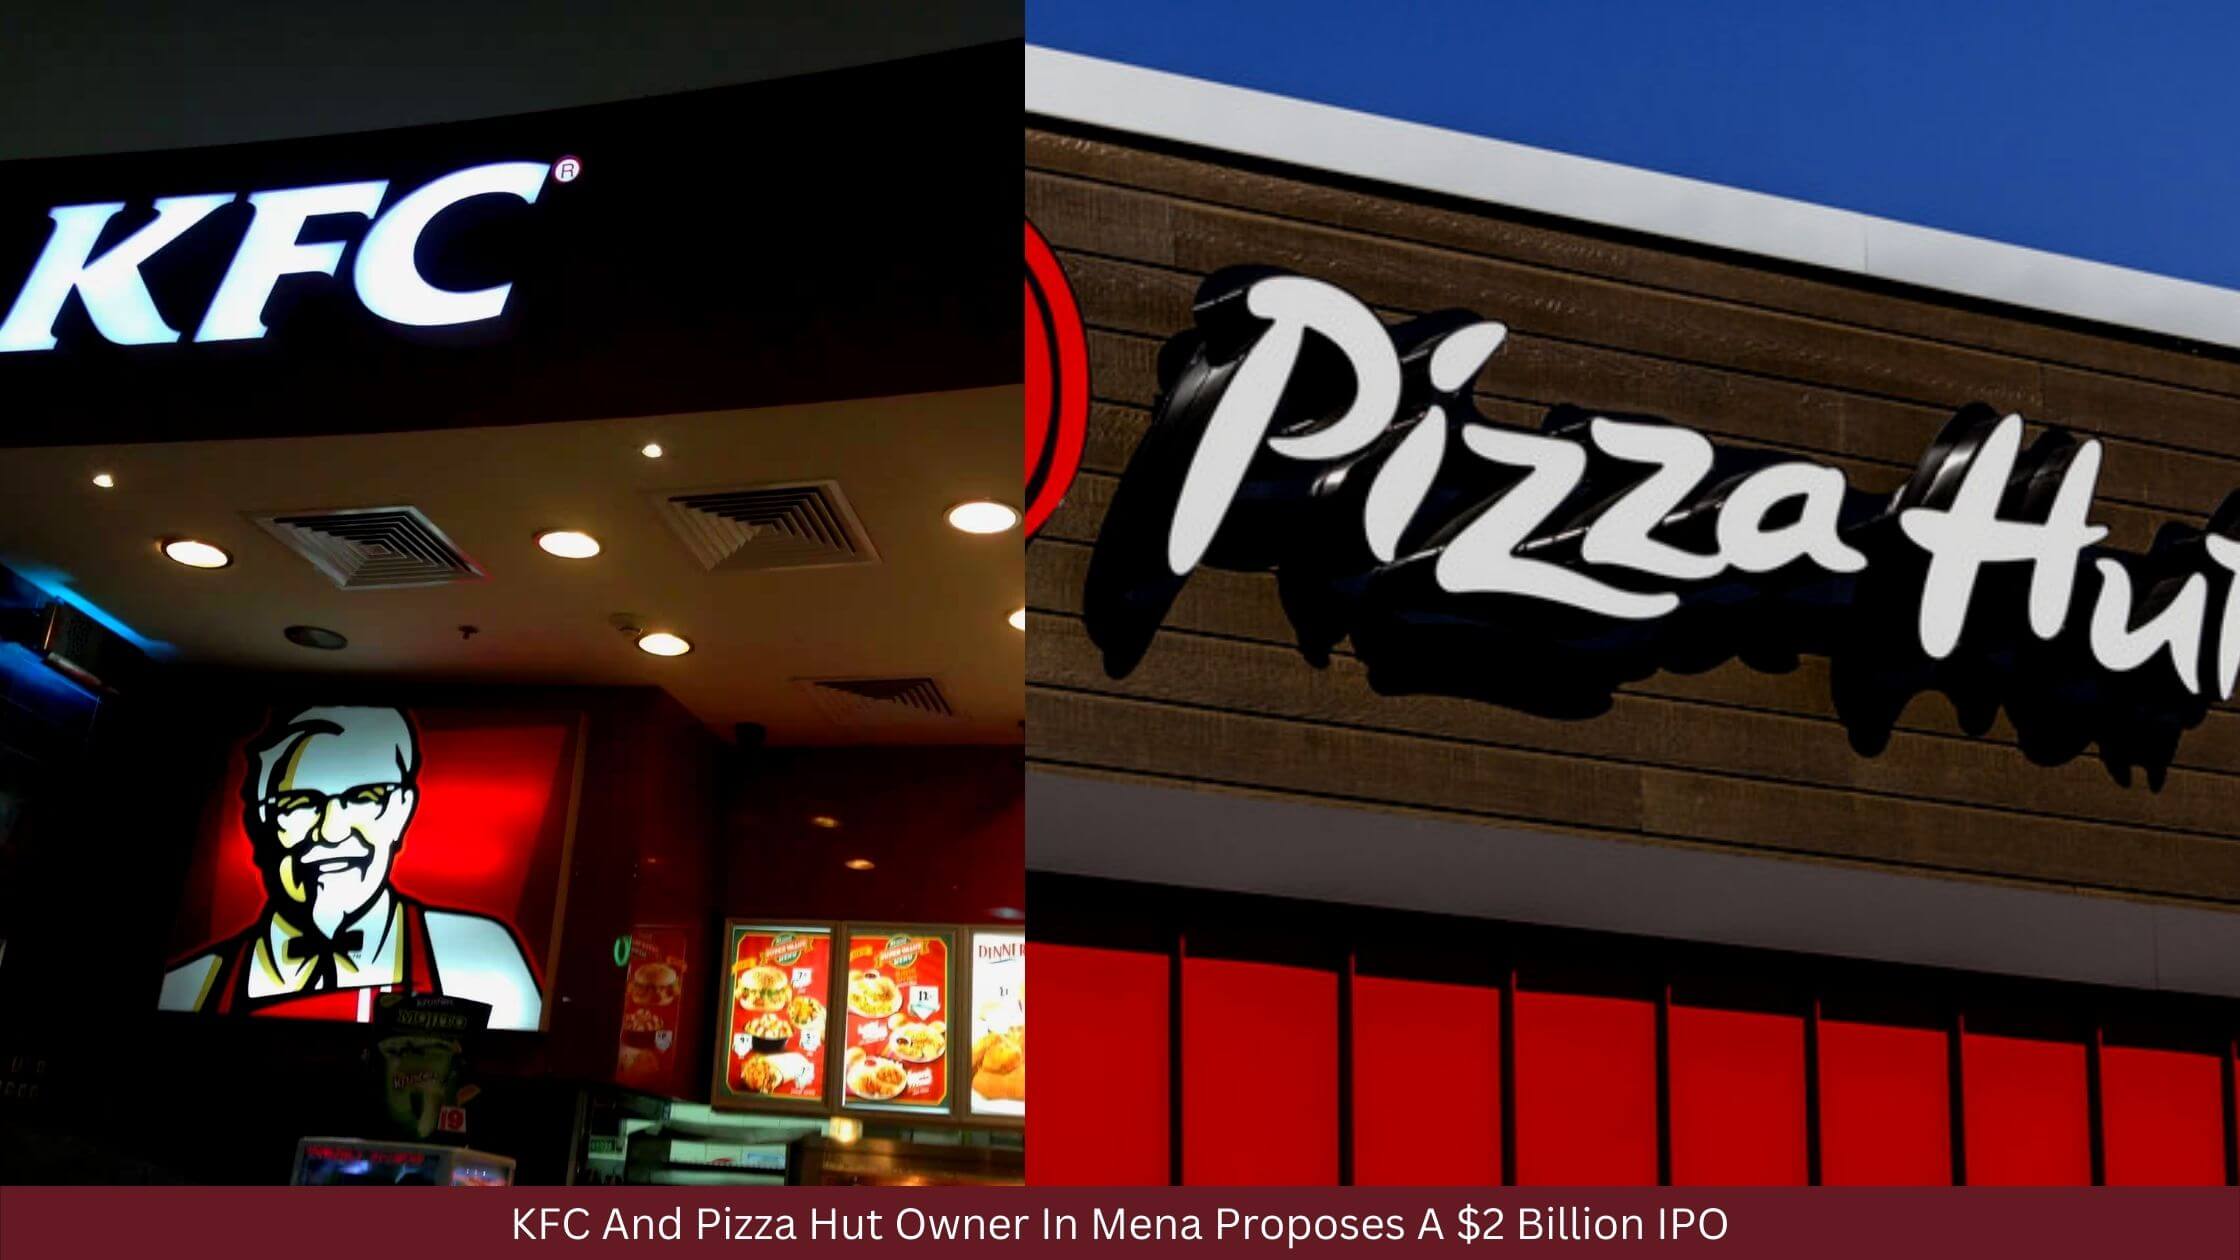 KFC And Pizza Hut Owner In Mena Proposes A $2 Billion IPO